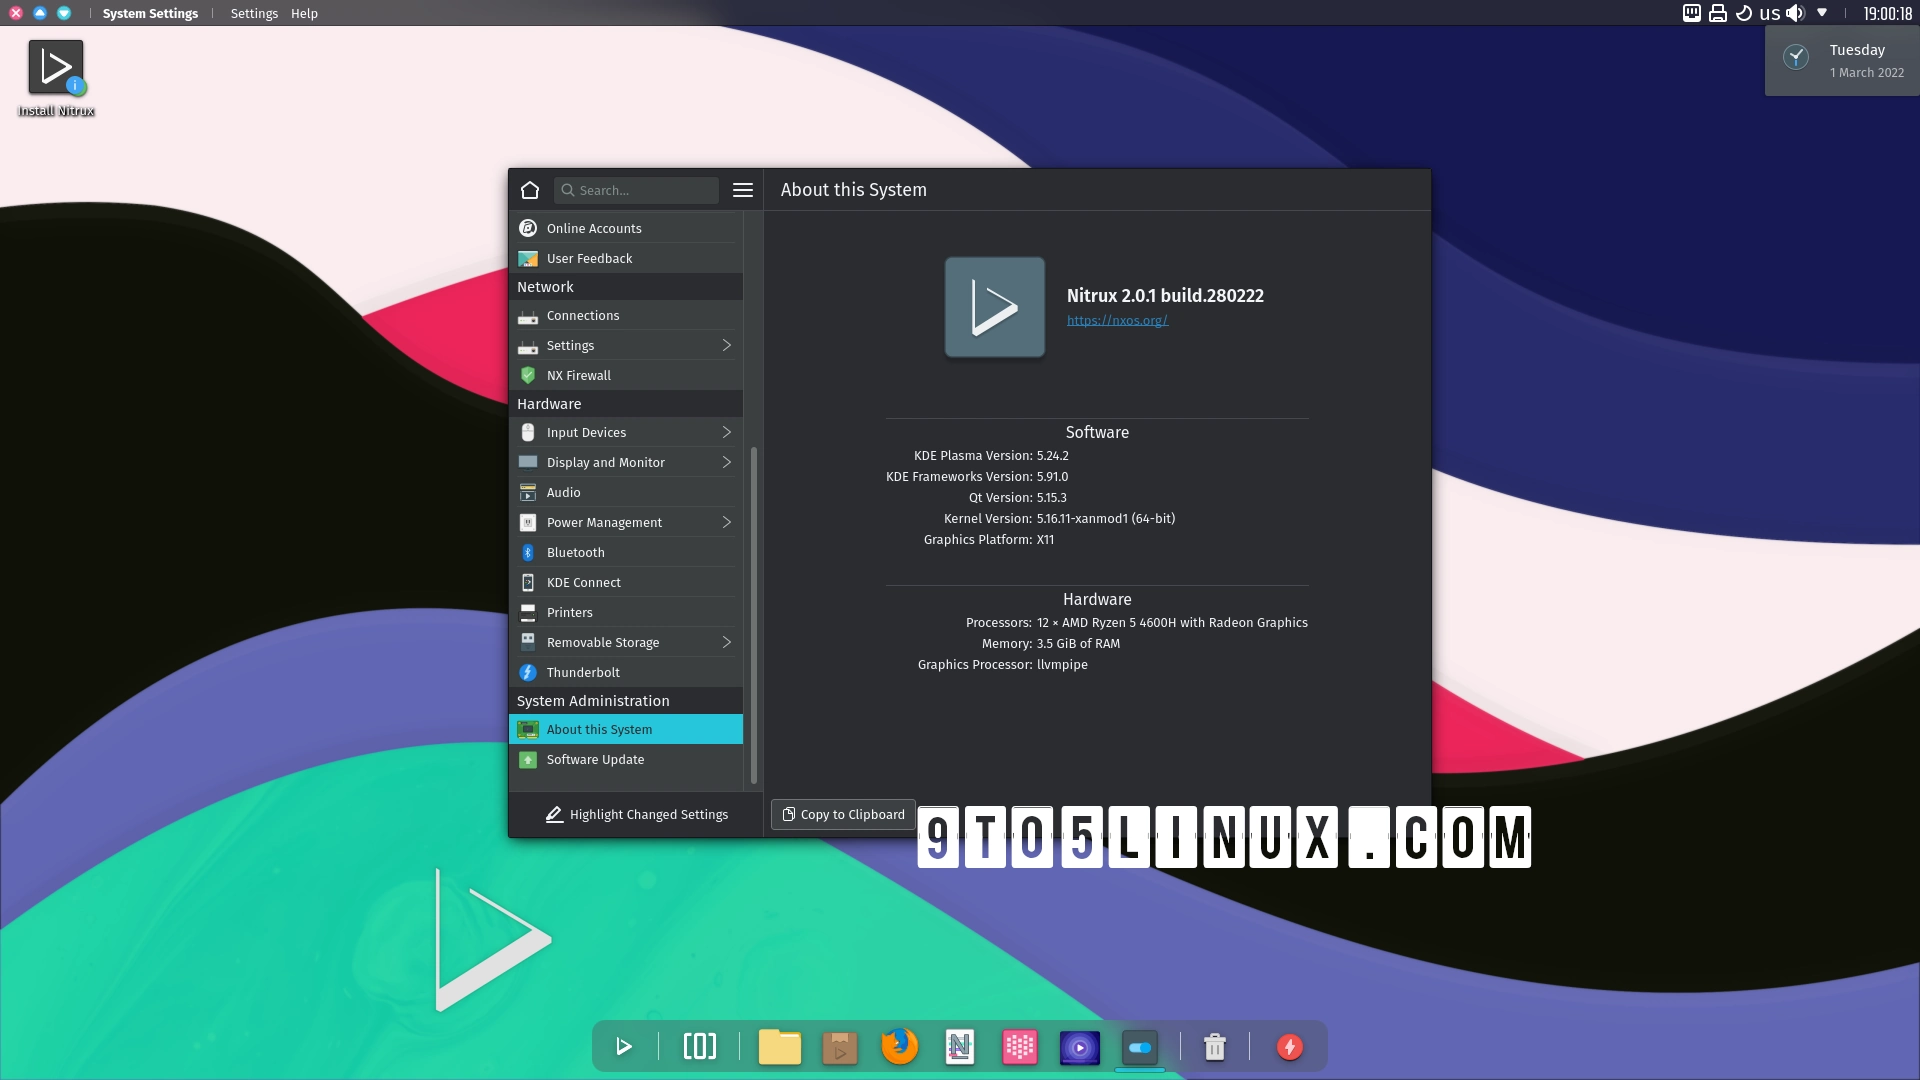 Nitrux 2.0.1 Switches to Mesa 22.1 by Default for Linux Gaming, Adds KDE Plasma 5.24 LTS